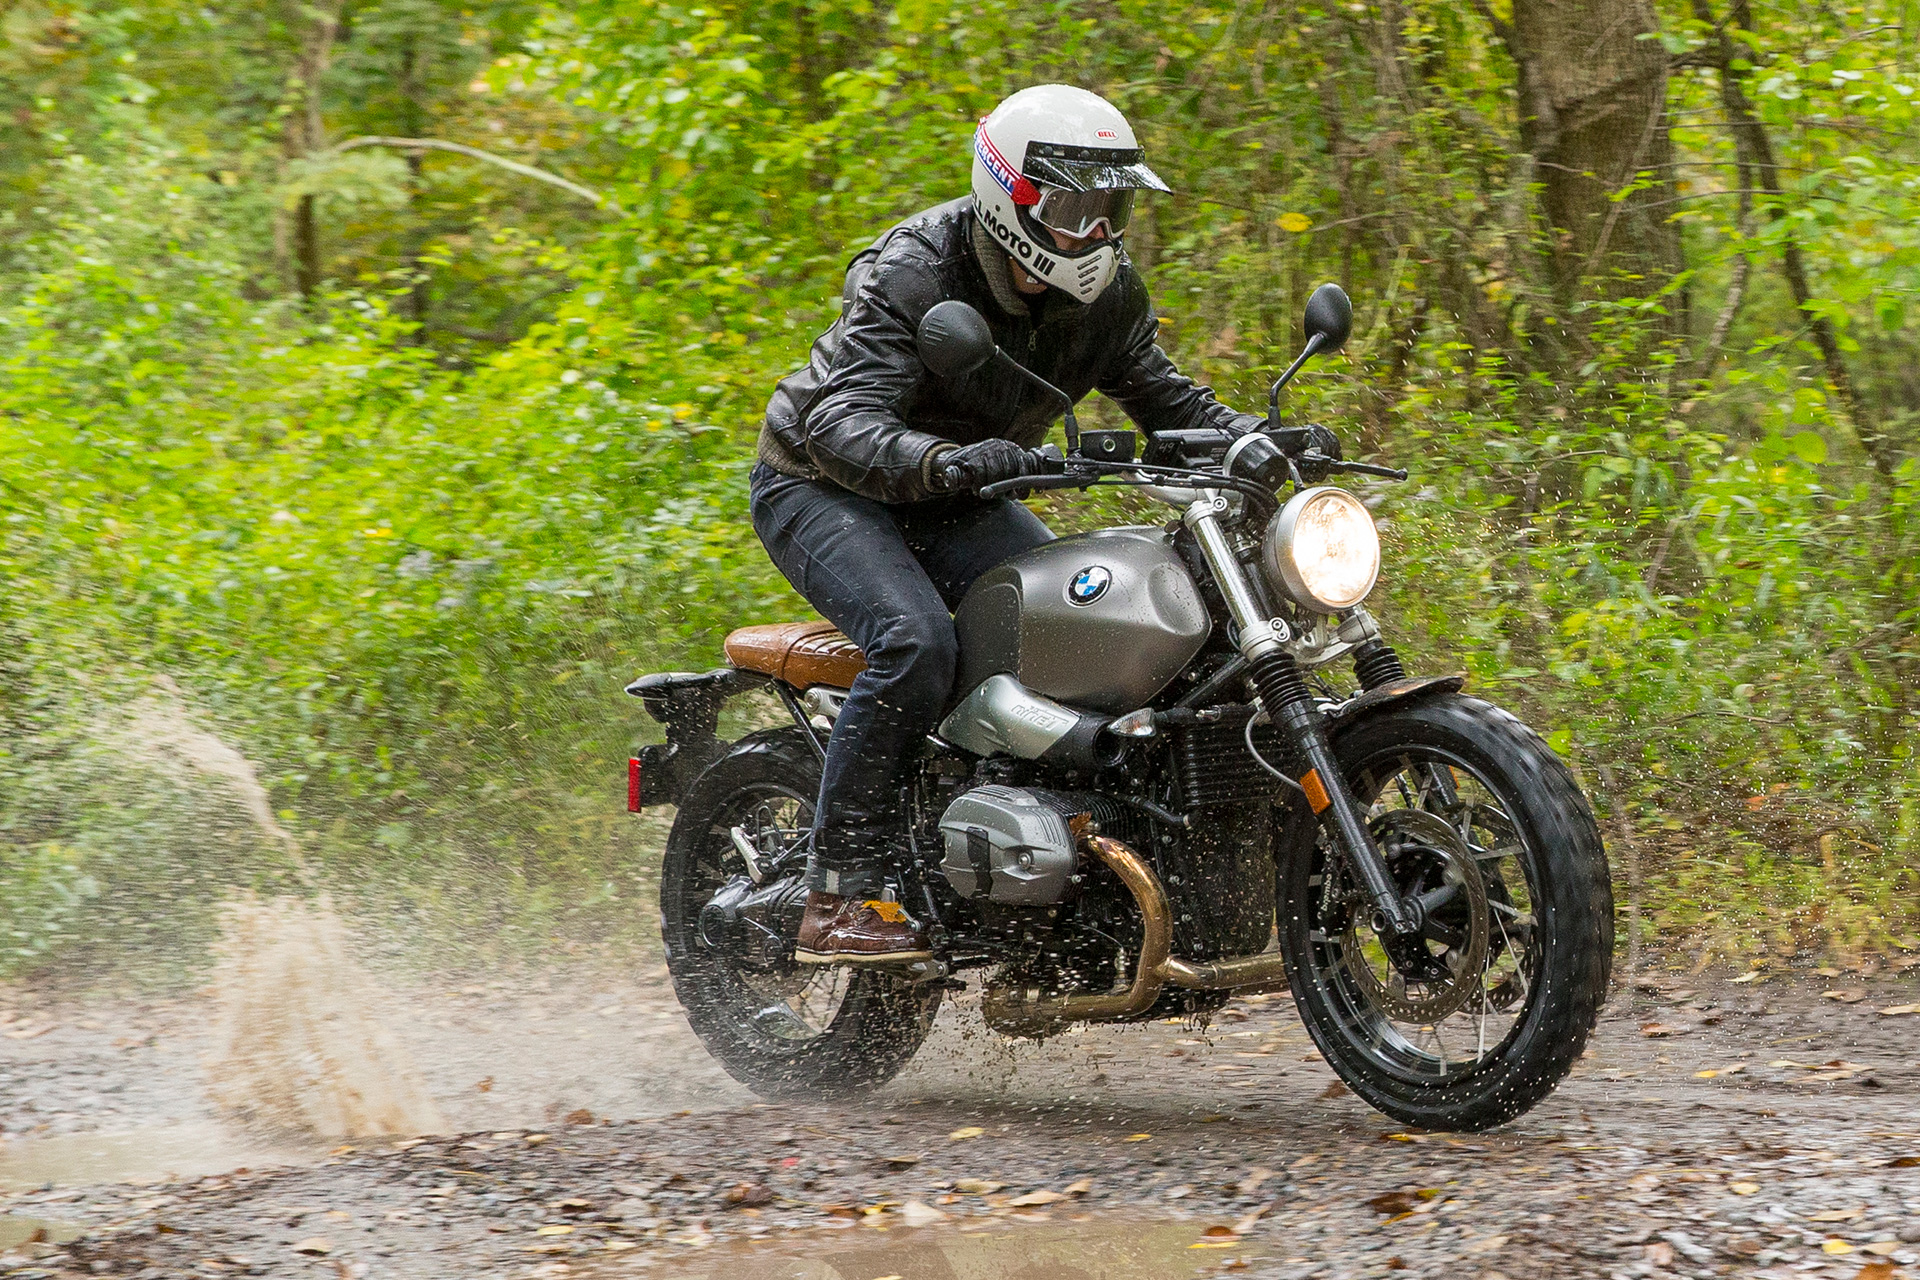 Bell Moto-3 Motorcycle Helmet Gear Review | Cycle World